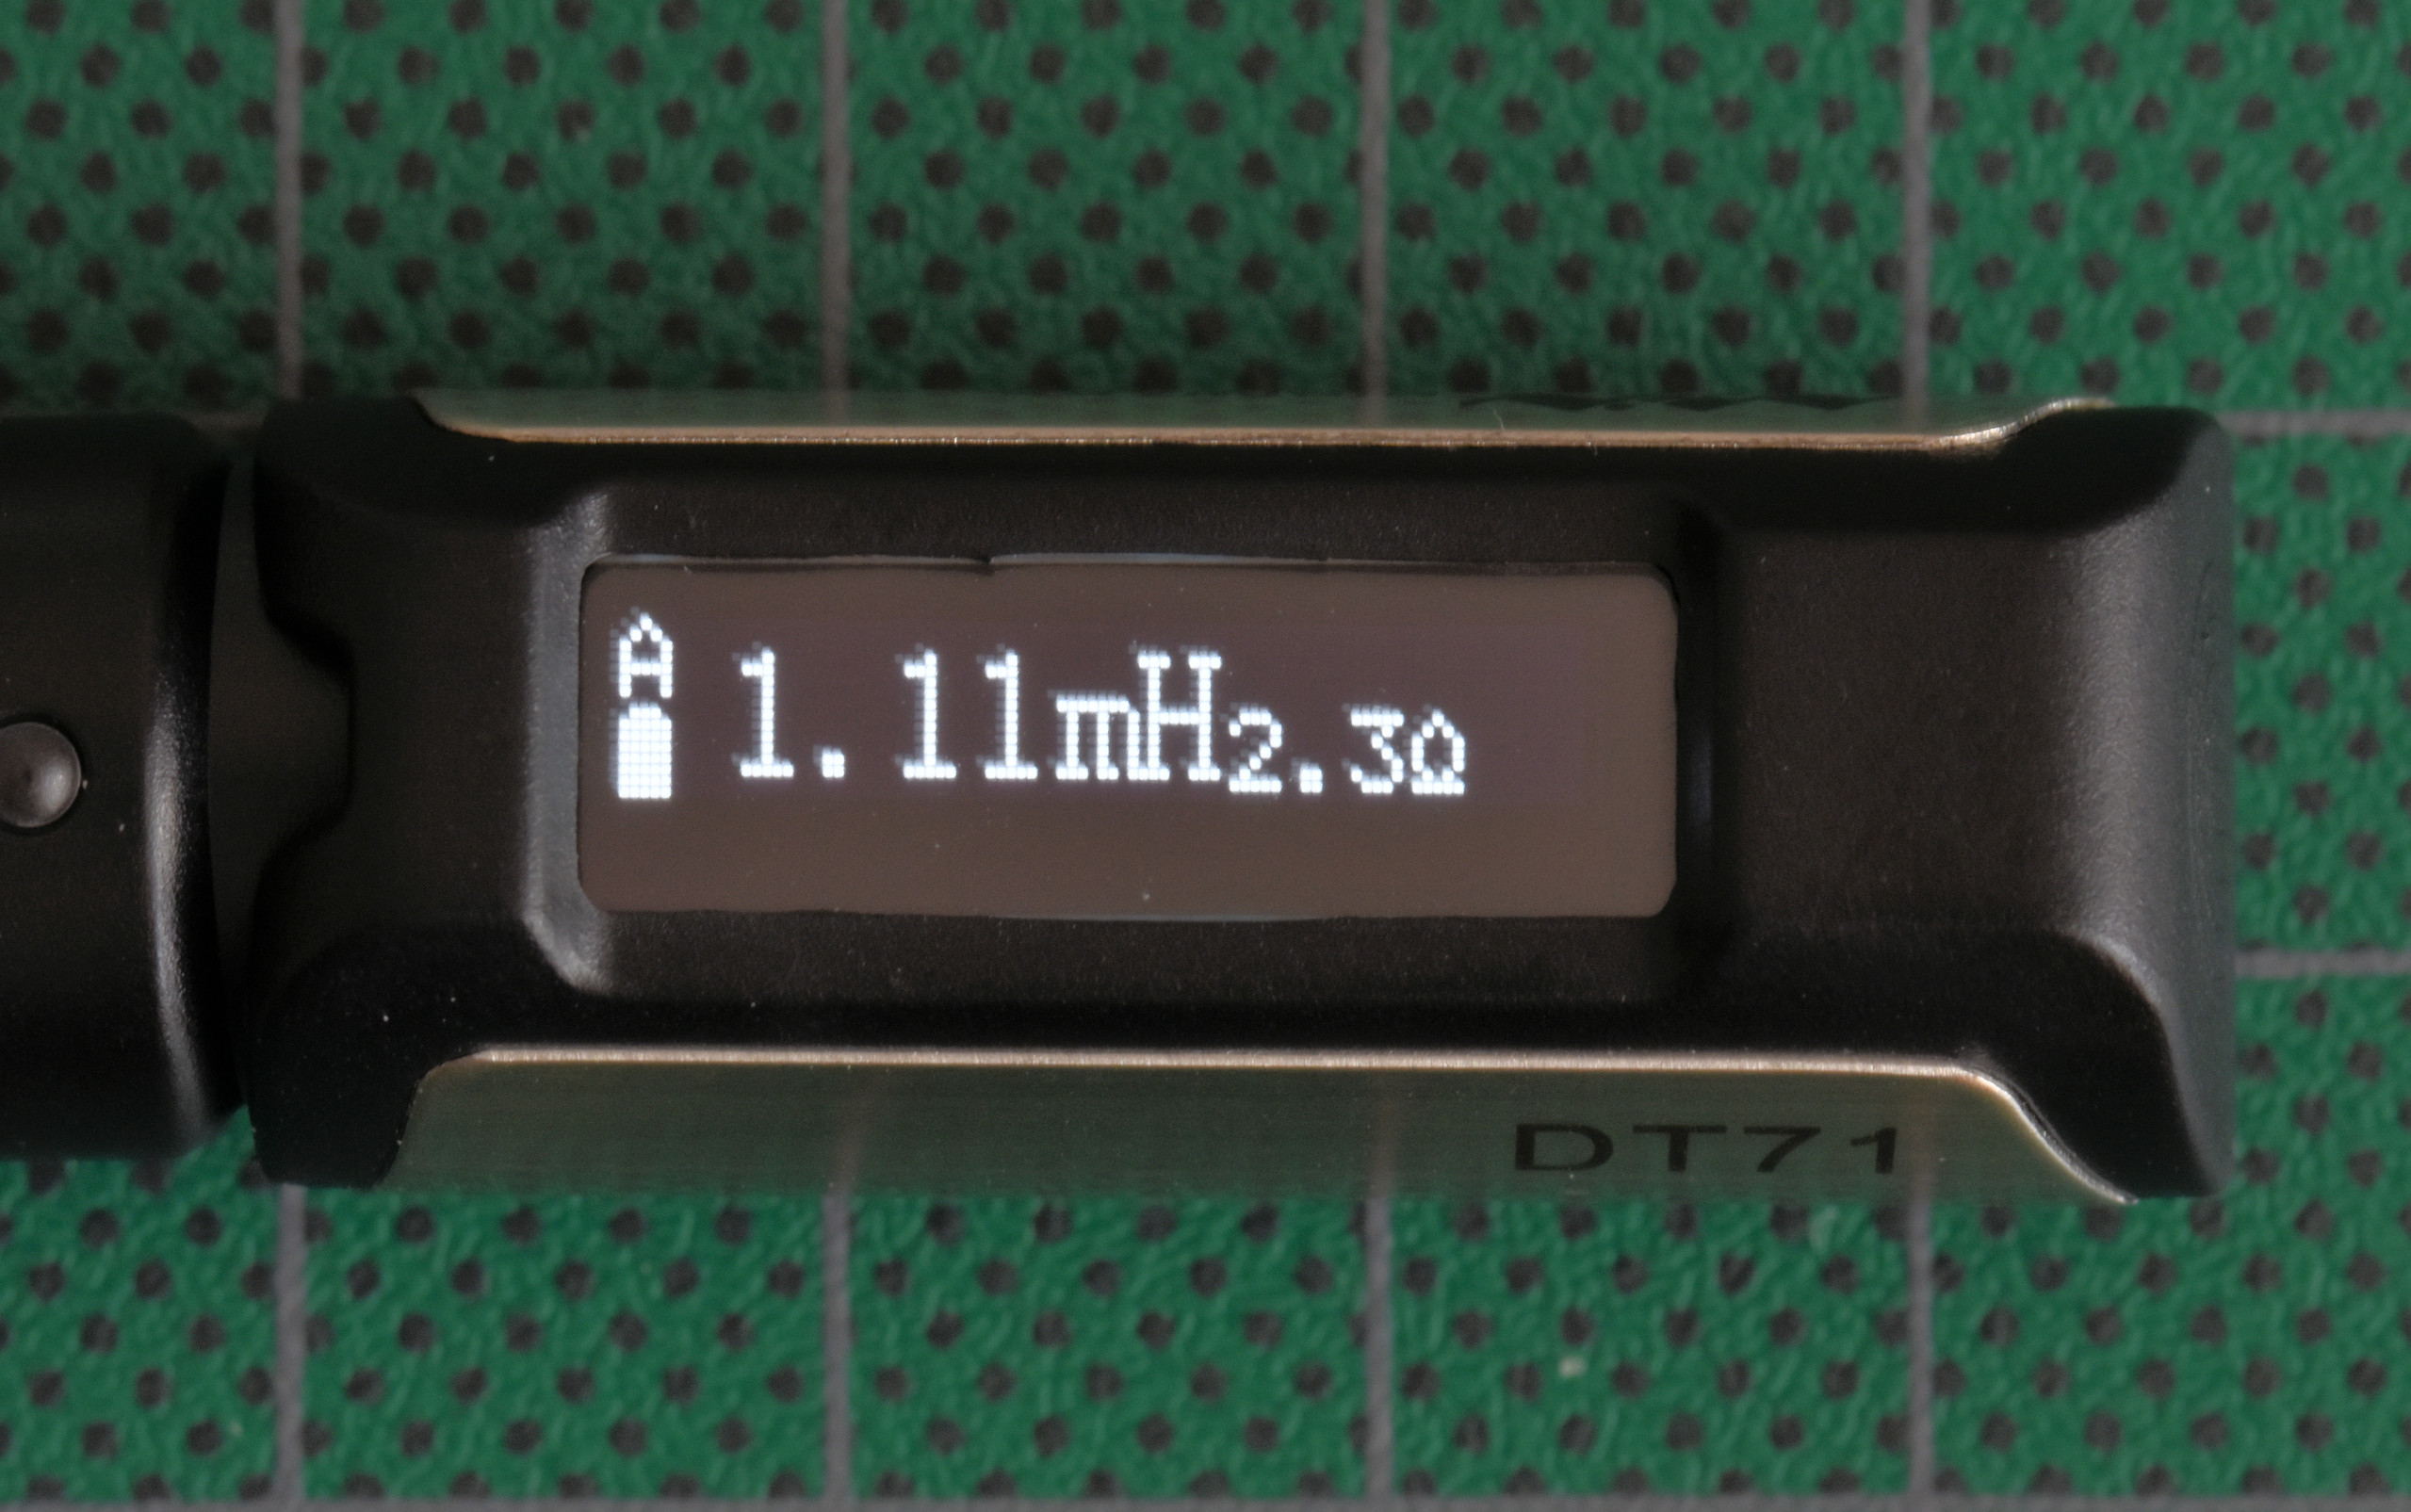 The DT71's OLED display